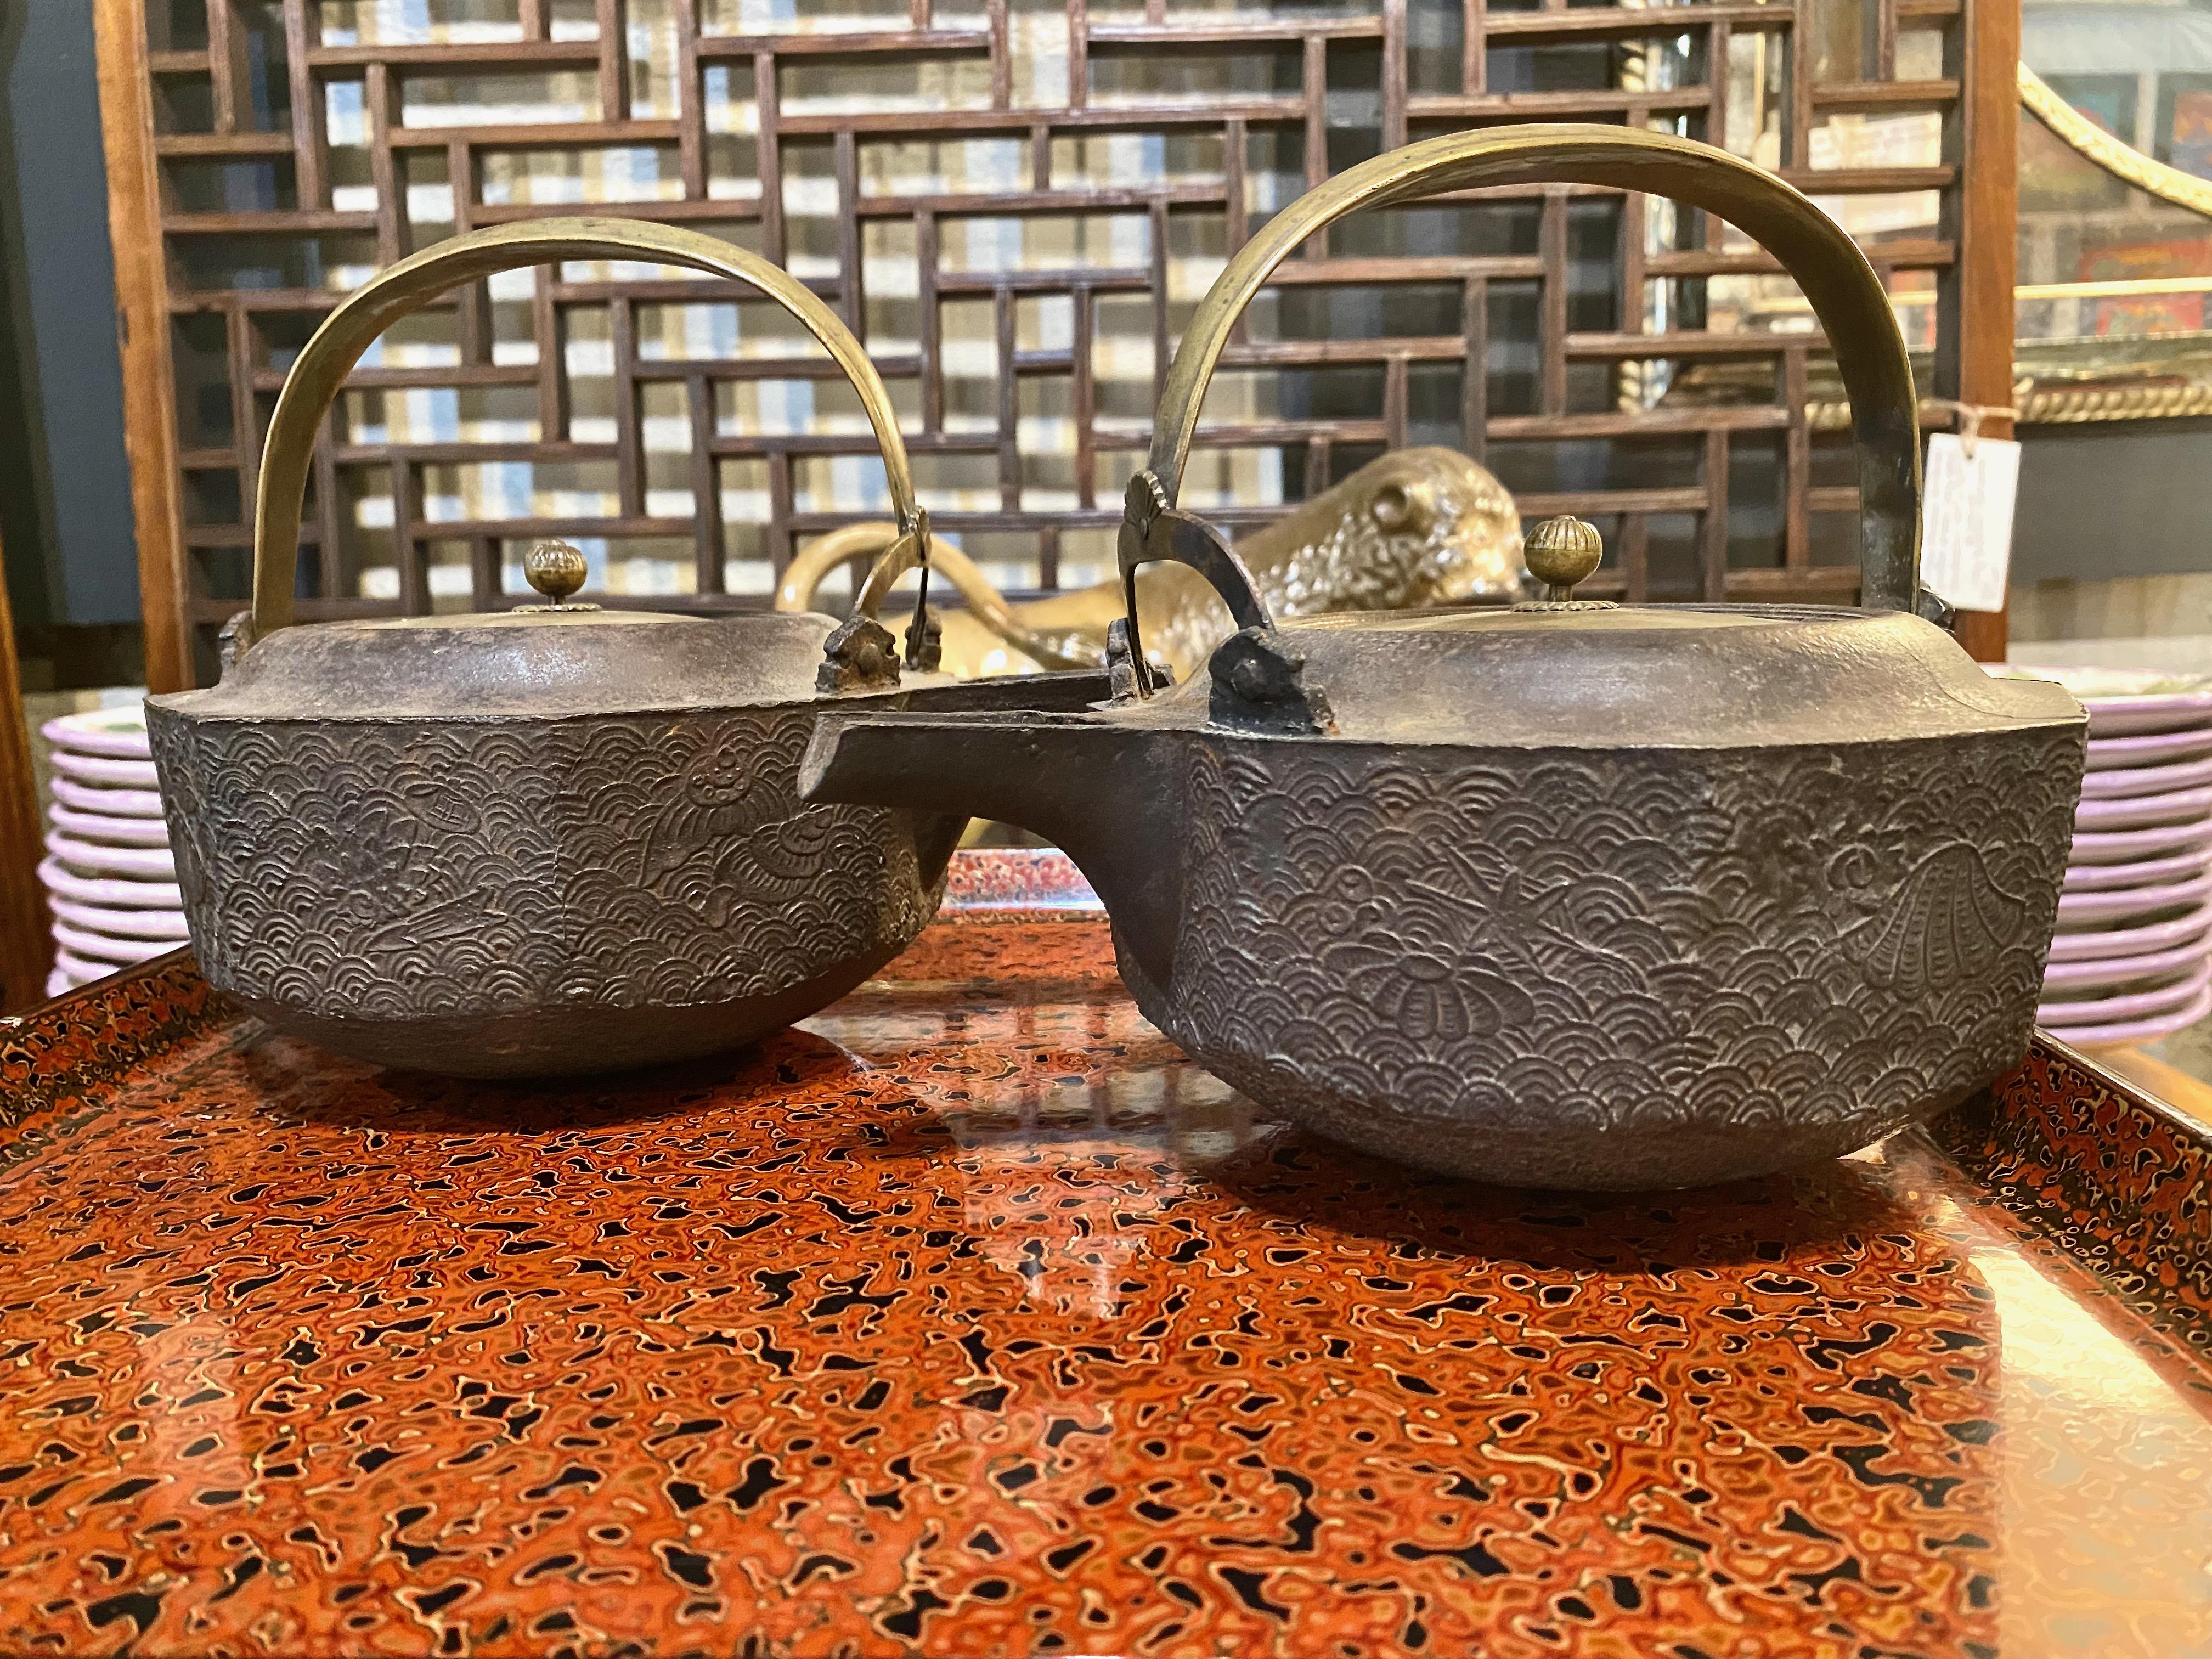 This is a wonderful pair of 19th century Octagonal Choshi or Sake Ewers that was created during the late Edo or Meiji Period. The Choshi are composed of an Octagonal finely cast iron kettle with and open end spout which differentiates them from the